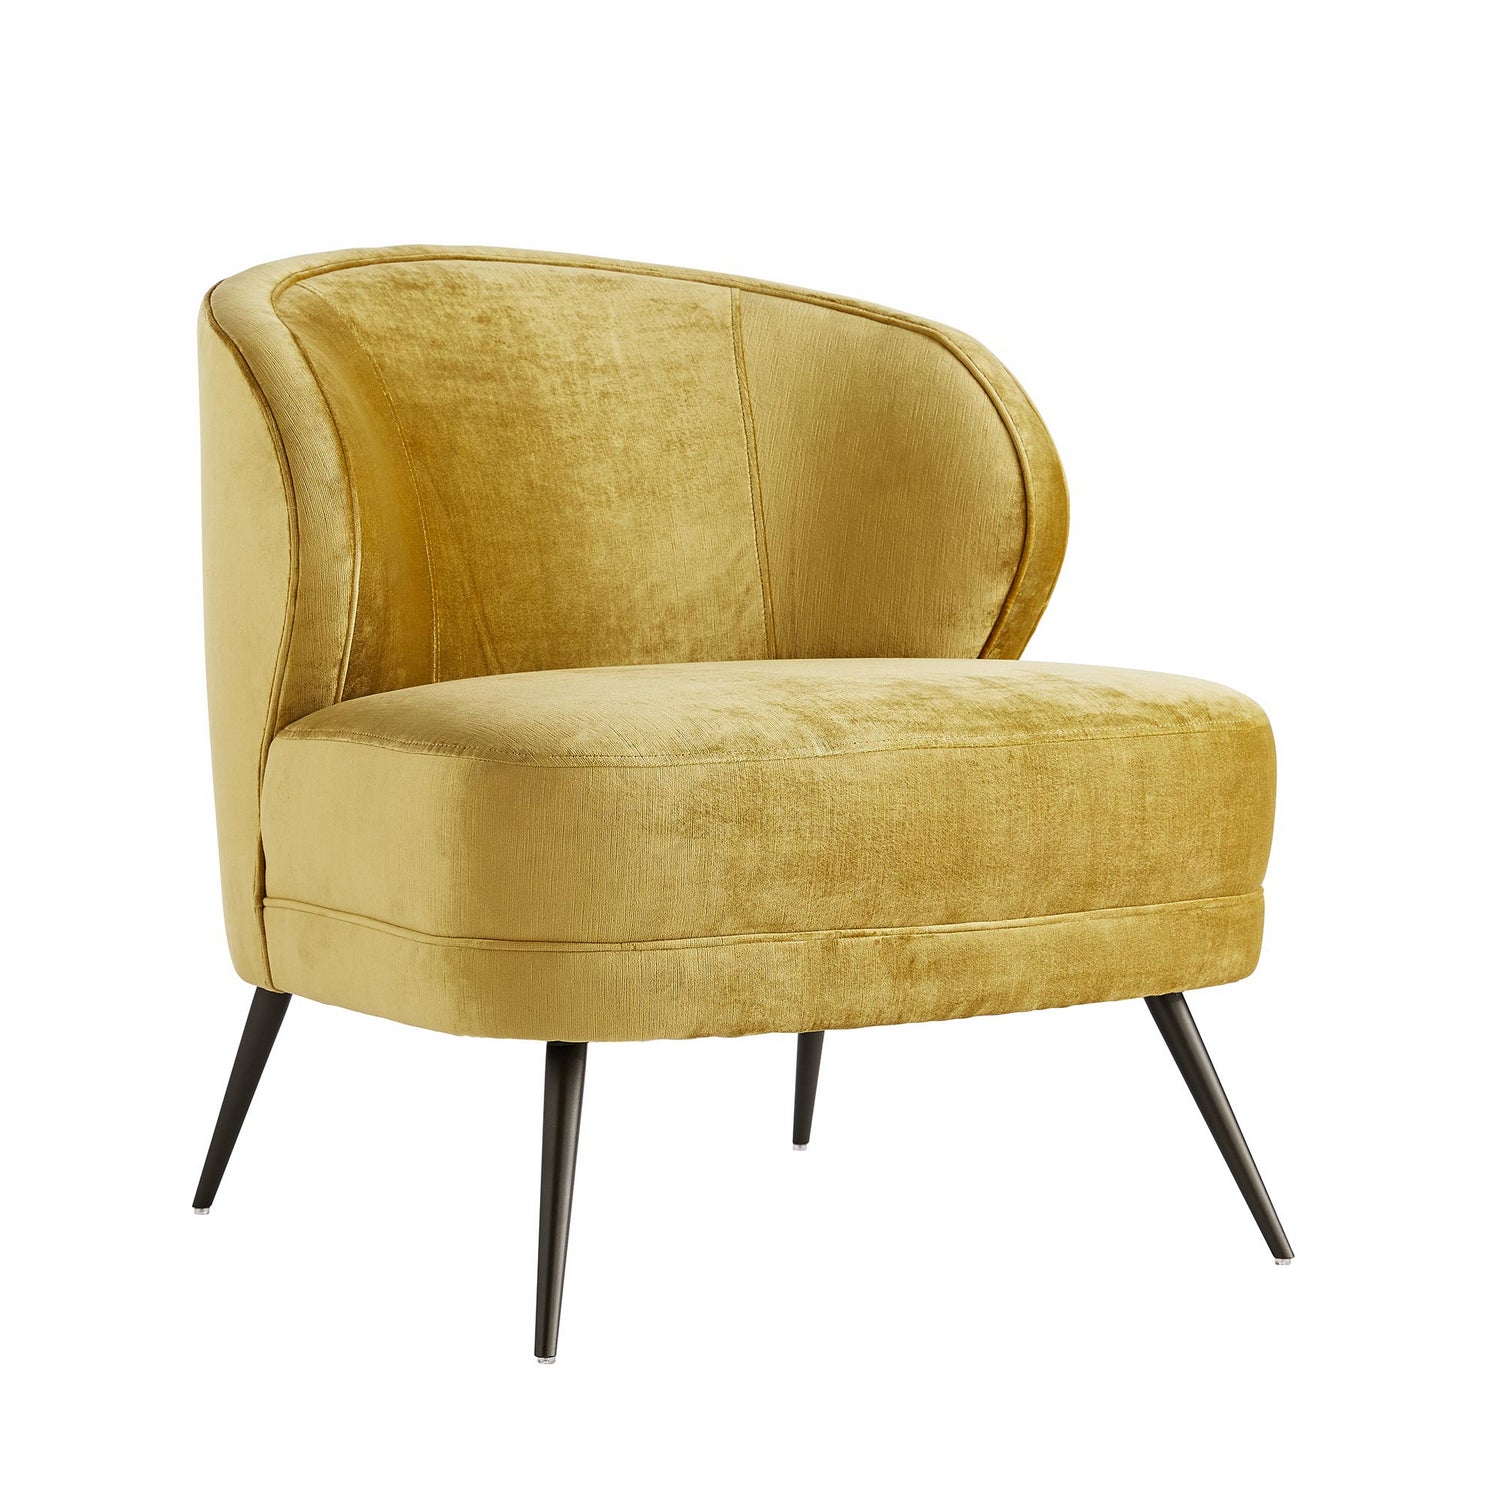 Chair from the Kitts collection in Marigold finish